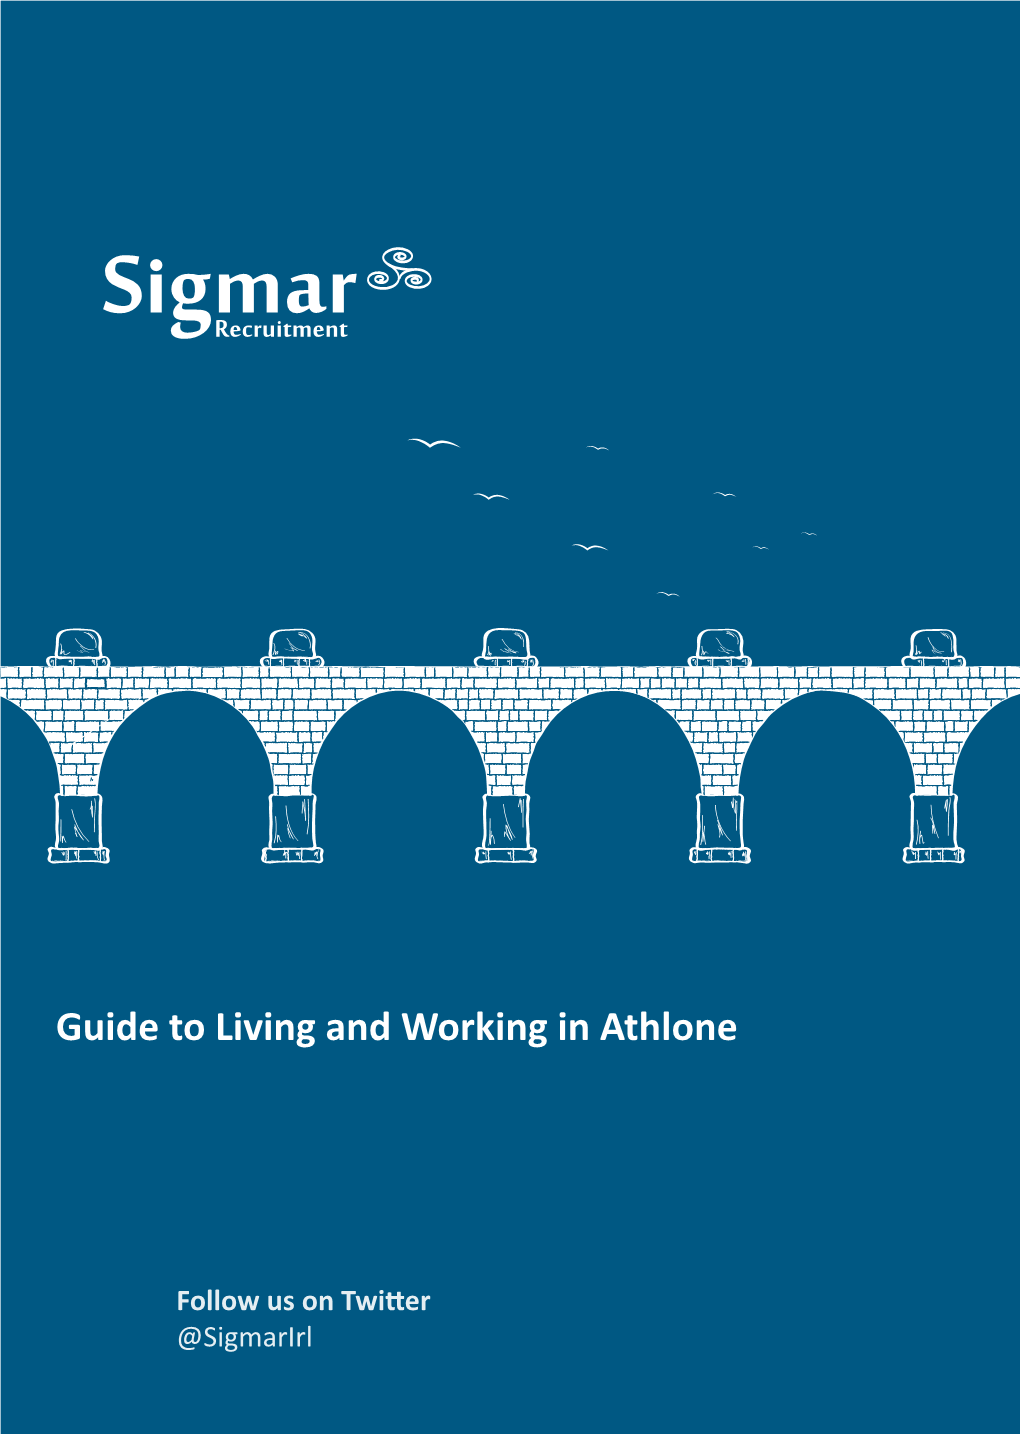 Guide to Living and Working in Athlone 2019